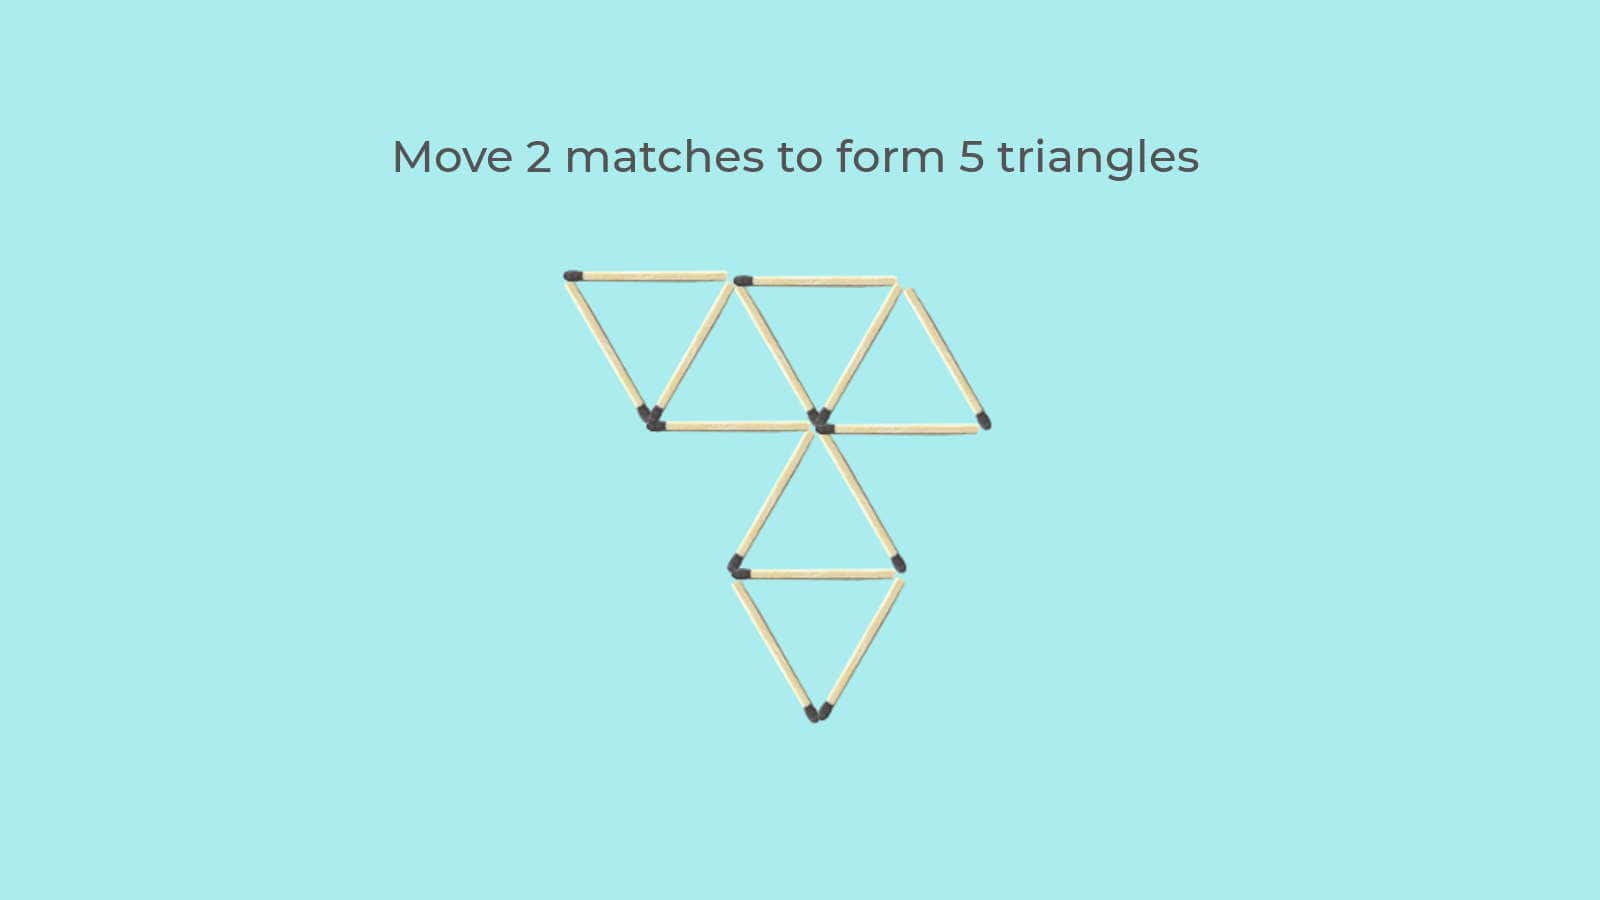 Move 2 matches to form 5 triangles puzzle